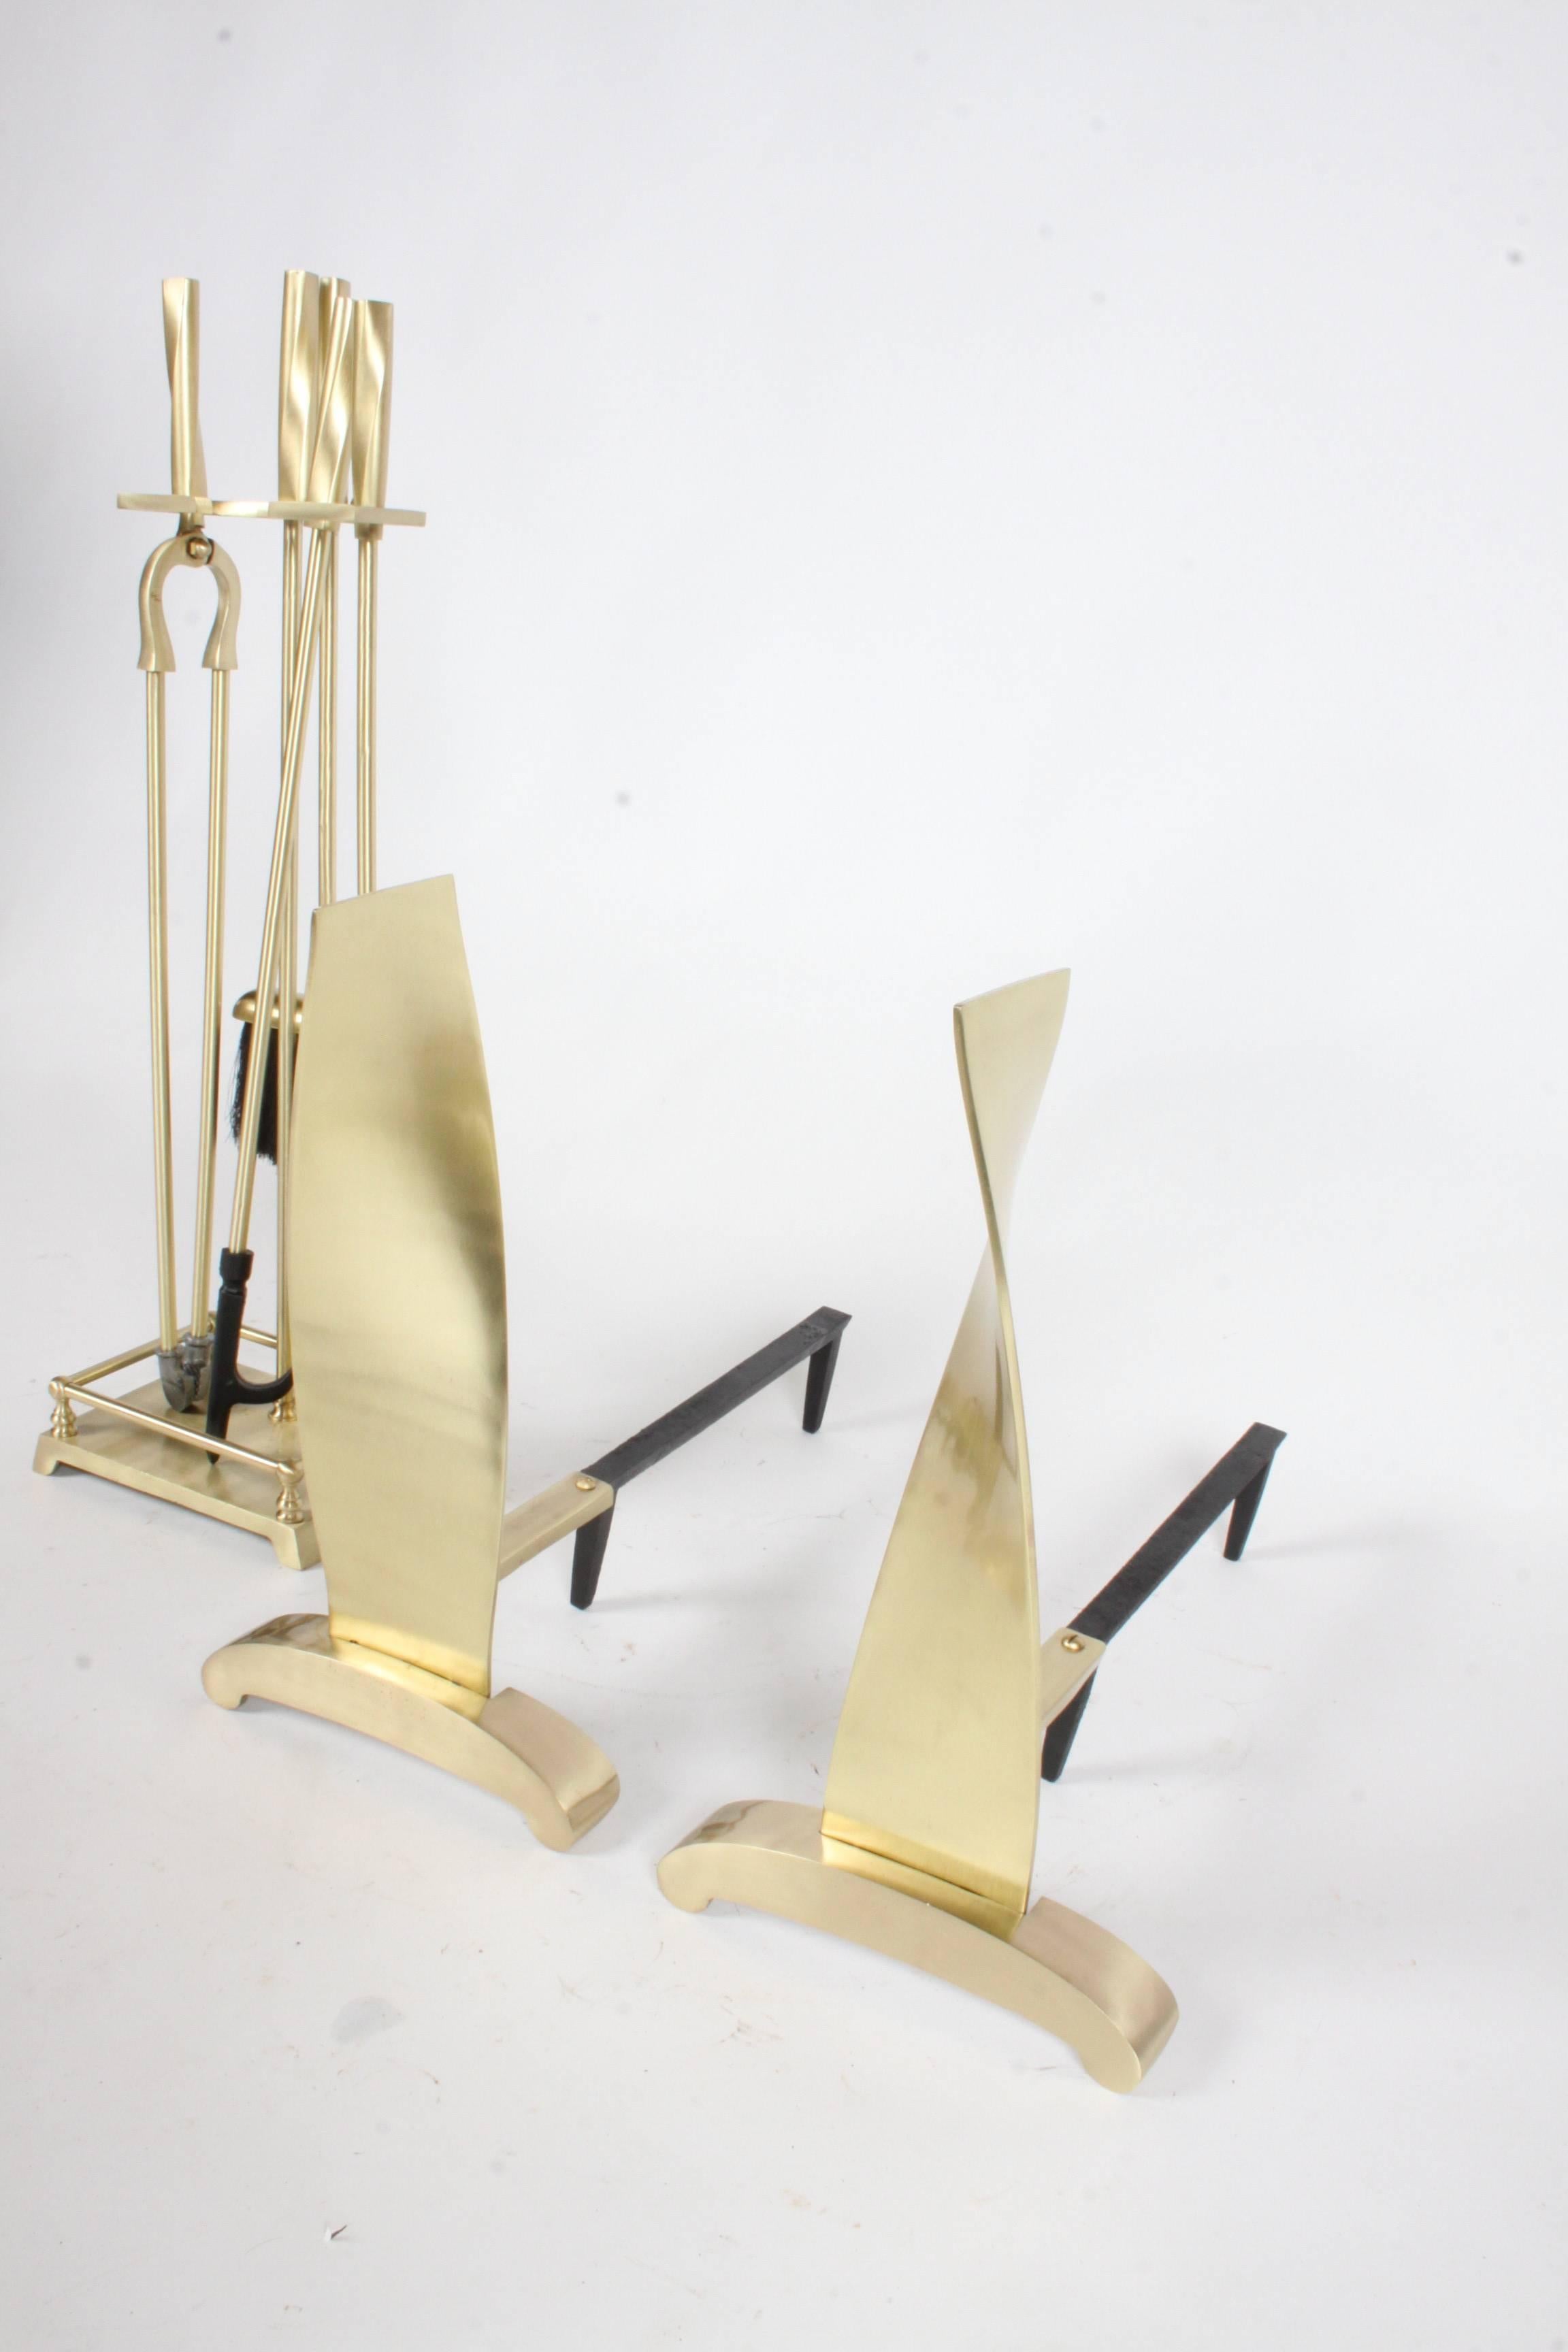 Brass Art Deco Modern torqued Andirons and Fire Tools Set, Deskey Style For Sale 3